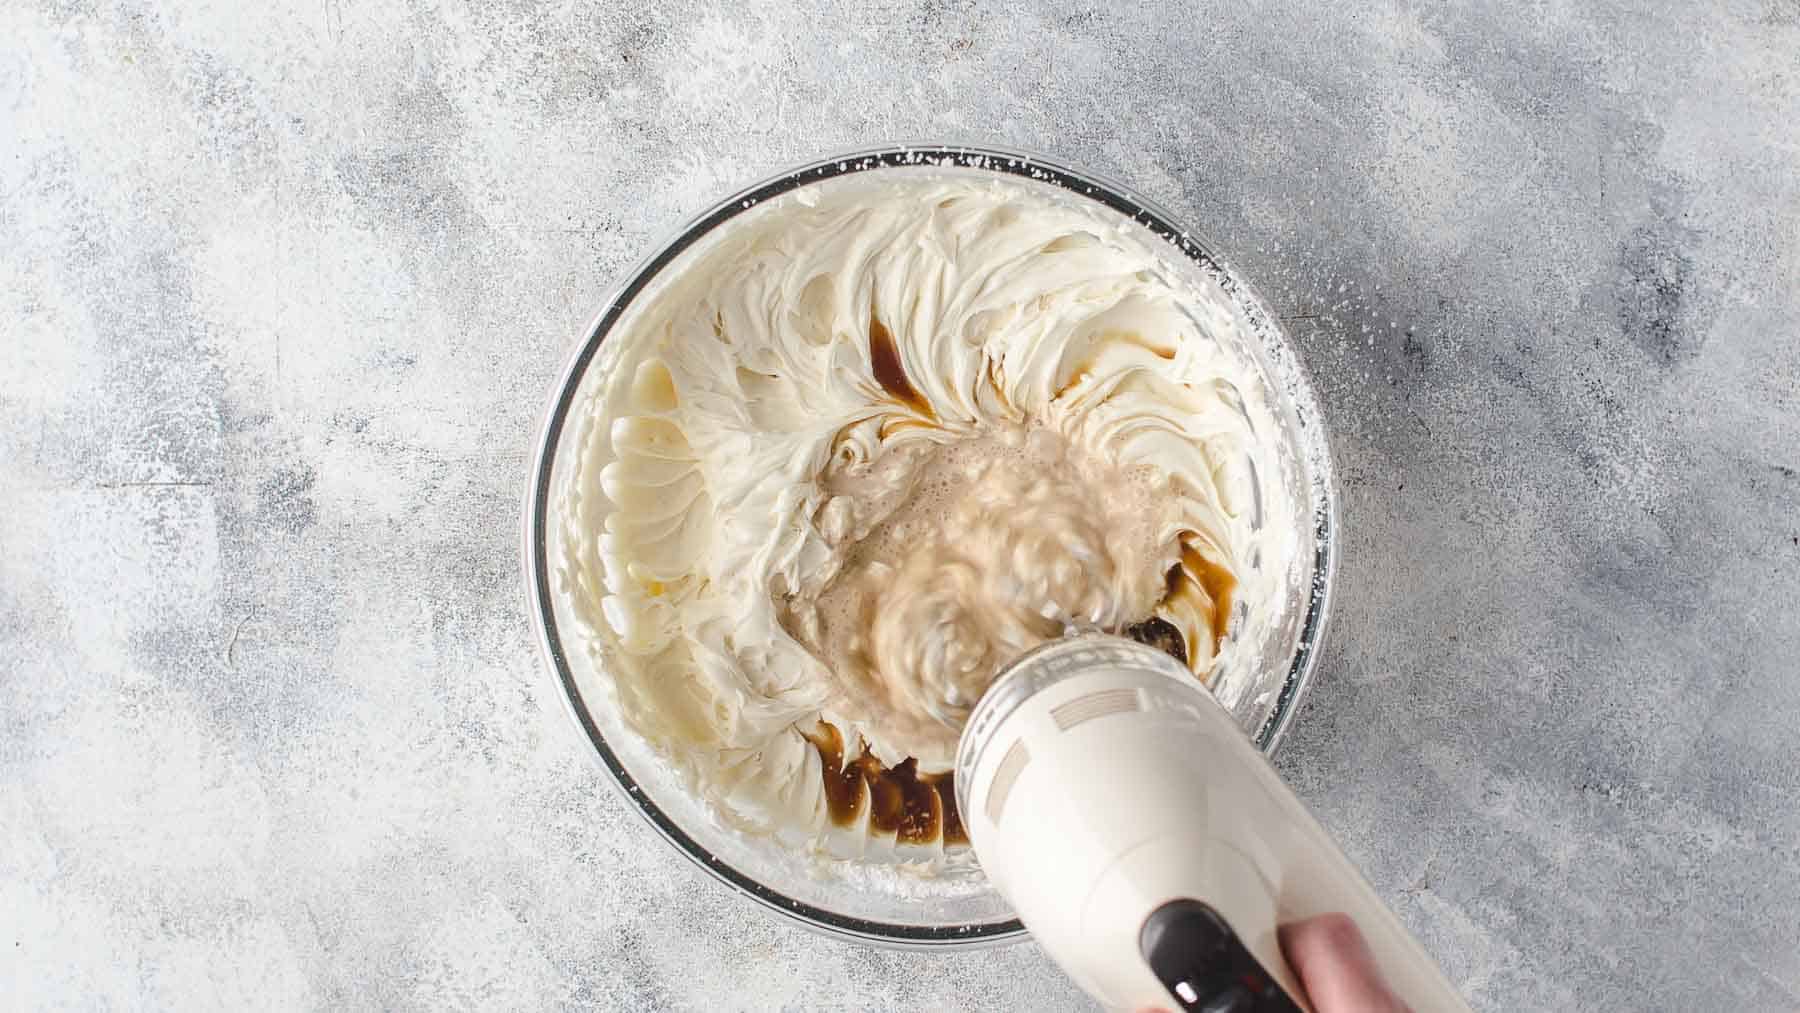 mixing coffee into mascarpone frosting